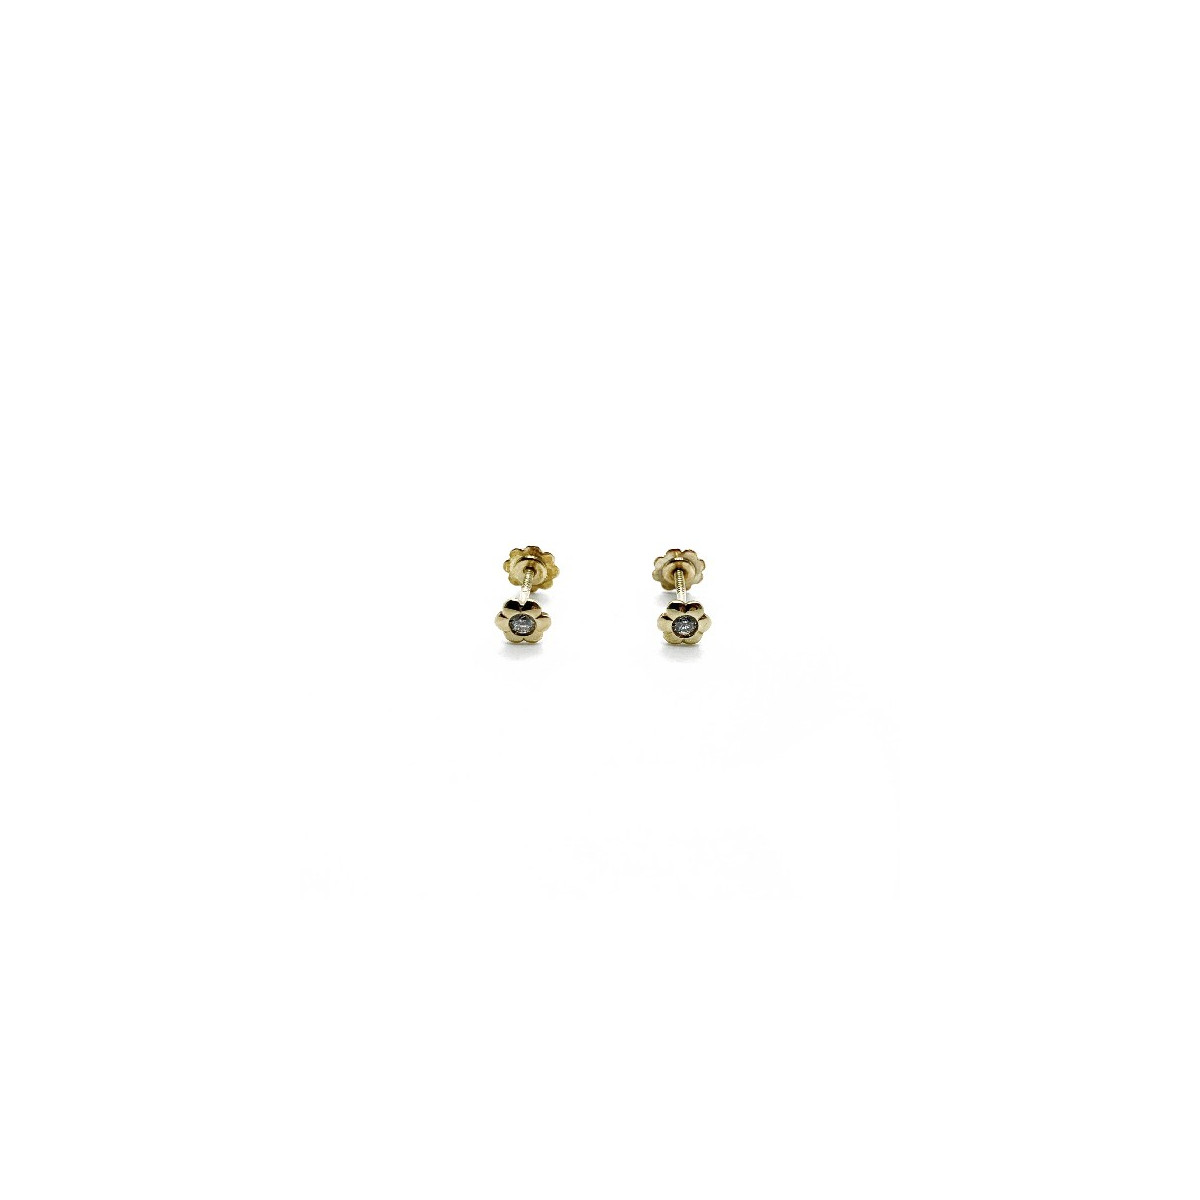 GOLD CLIMENT 1890 BABY EARRINGS - D-1479/R/ZR